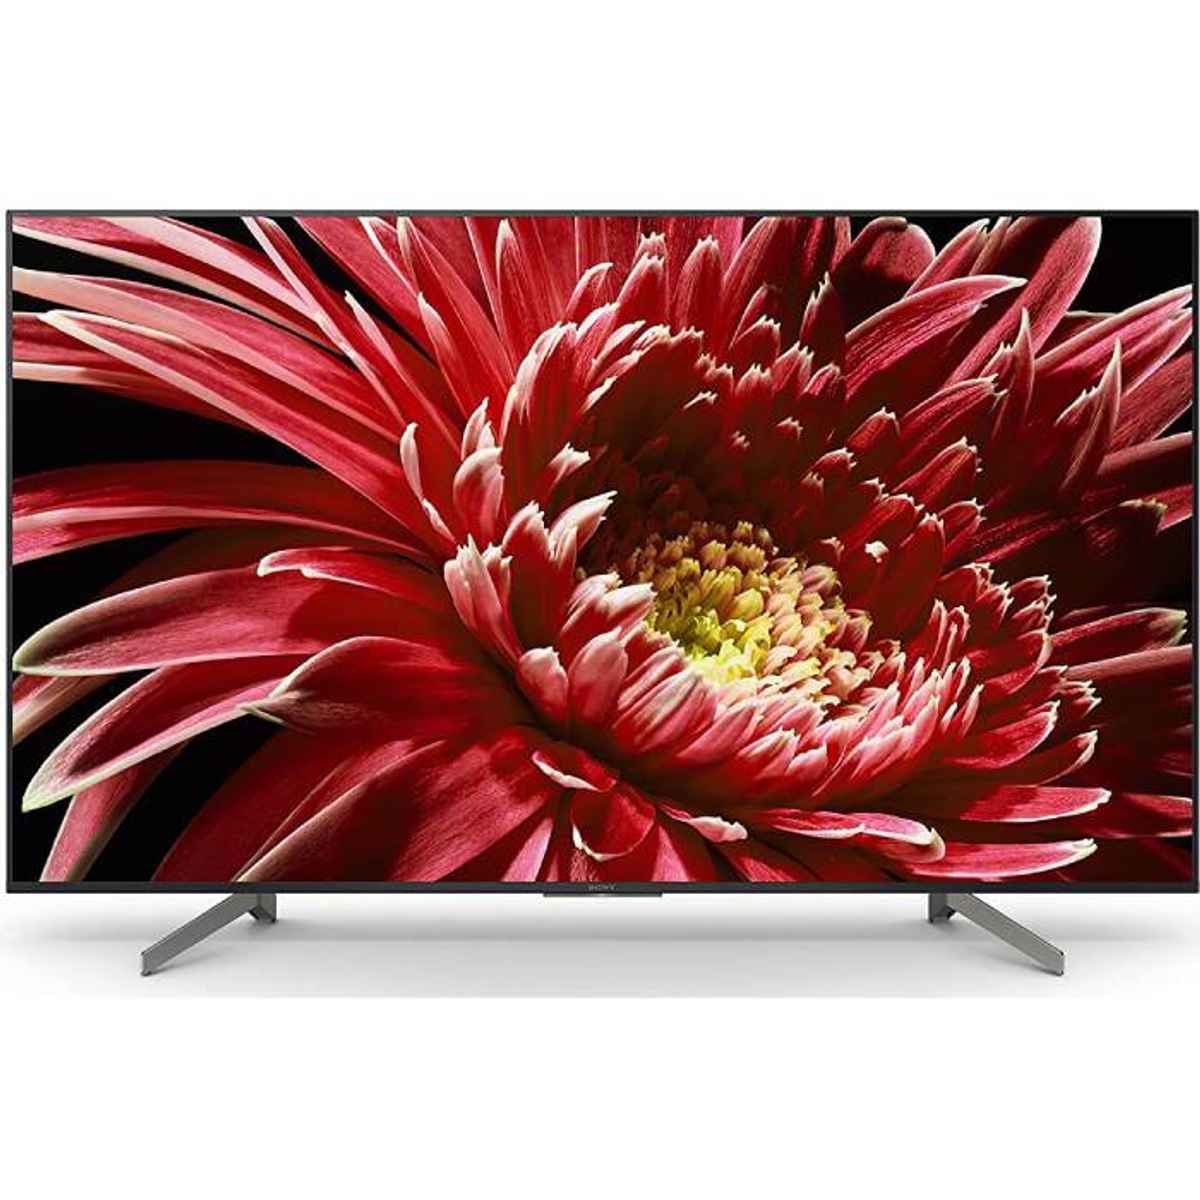 Sony Bravia 55 inches 4K Ultra HD Android LED TV (KD-55X8500G)